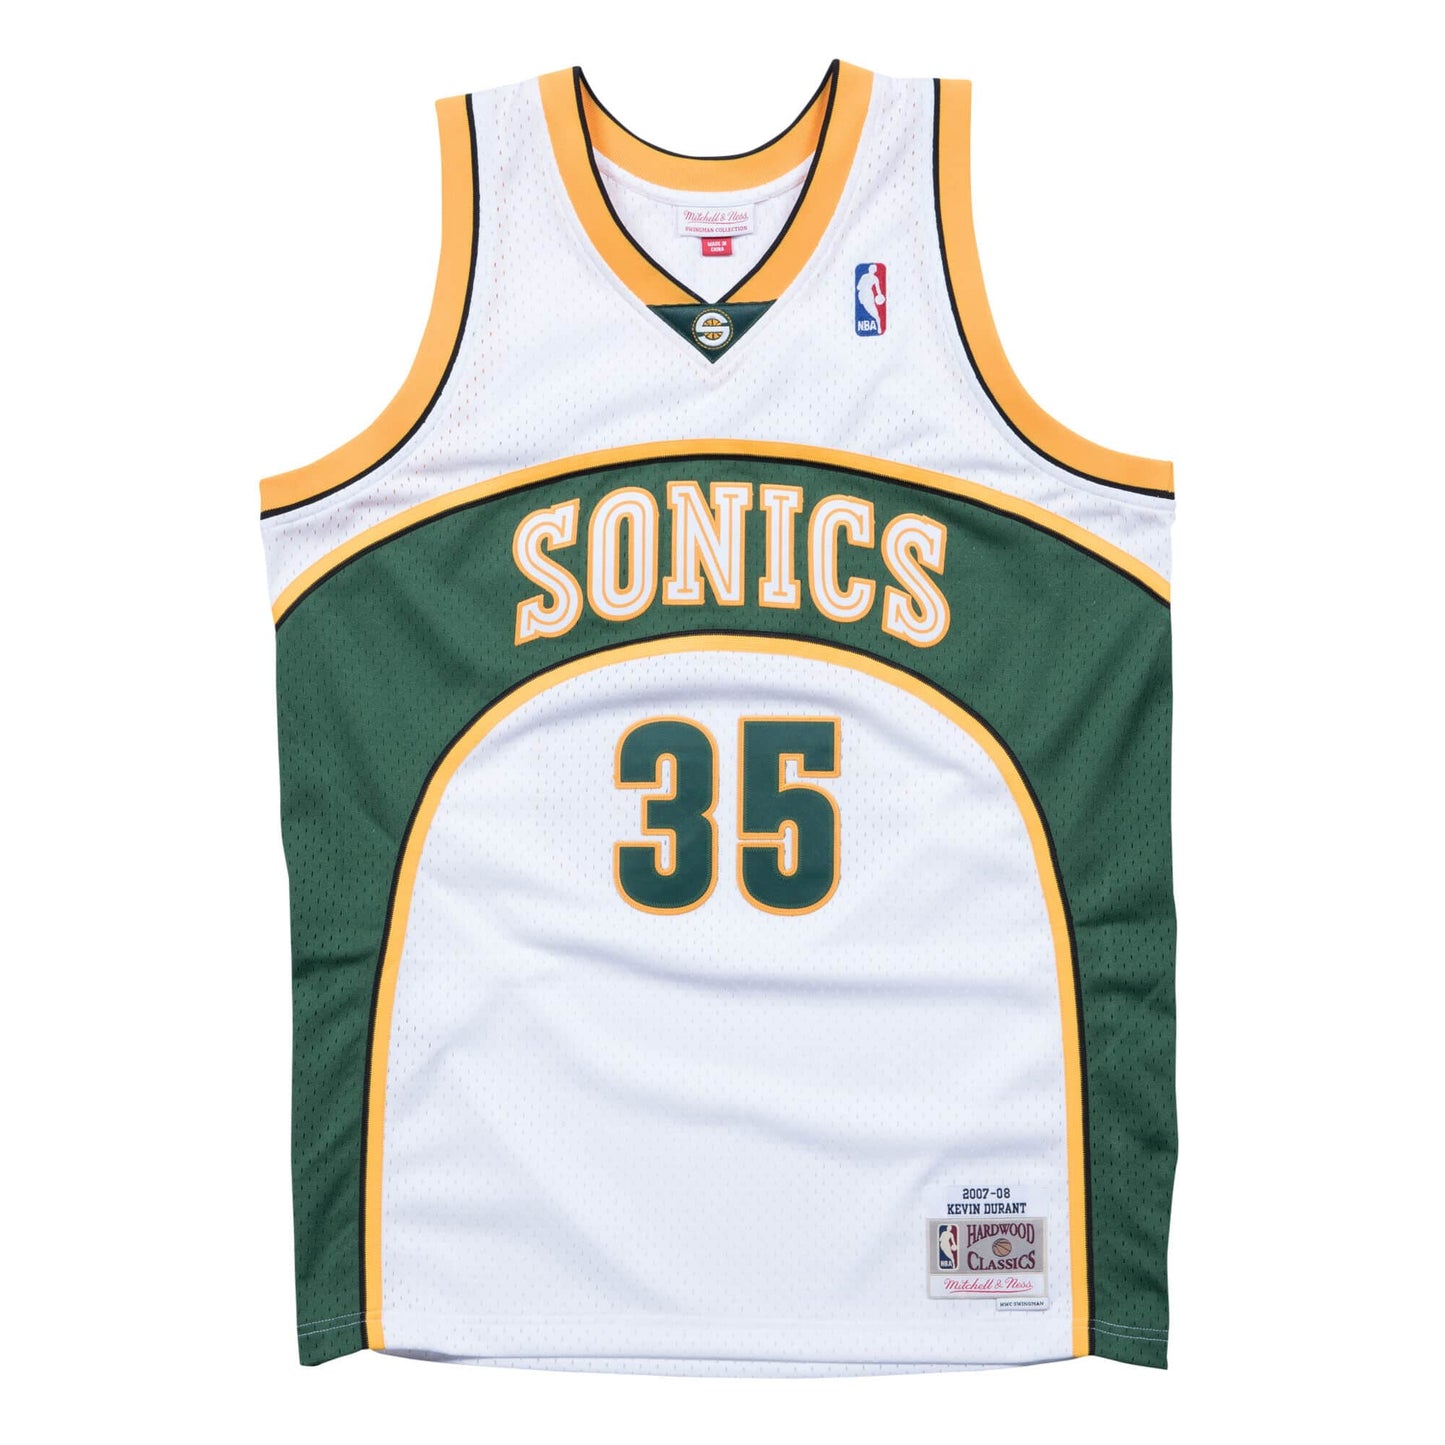 Seattle Supersonics Kevin Durant Mitchell and Ness Jersey - Home (2007-08)